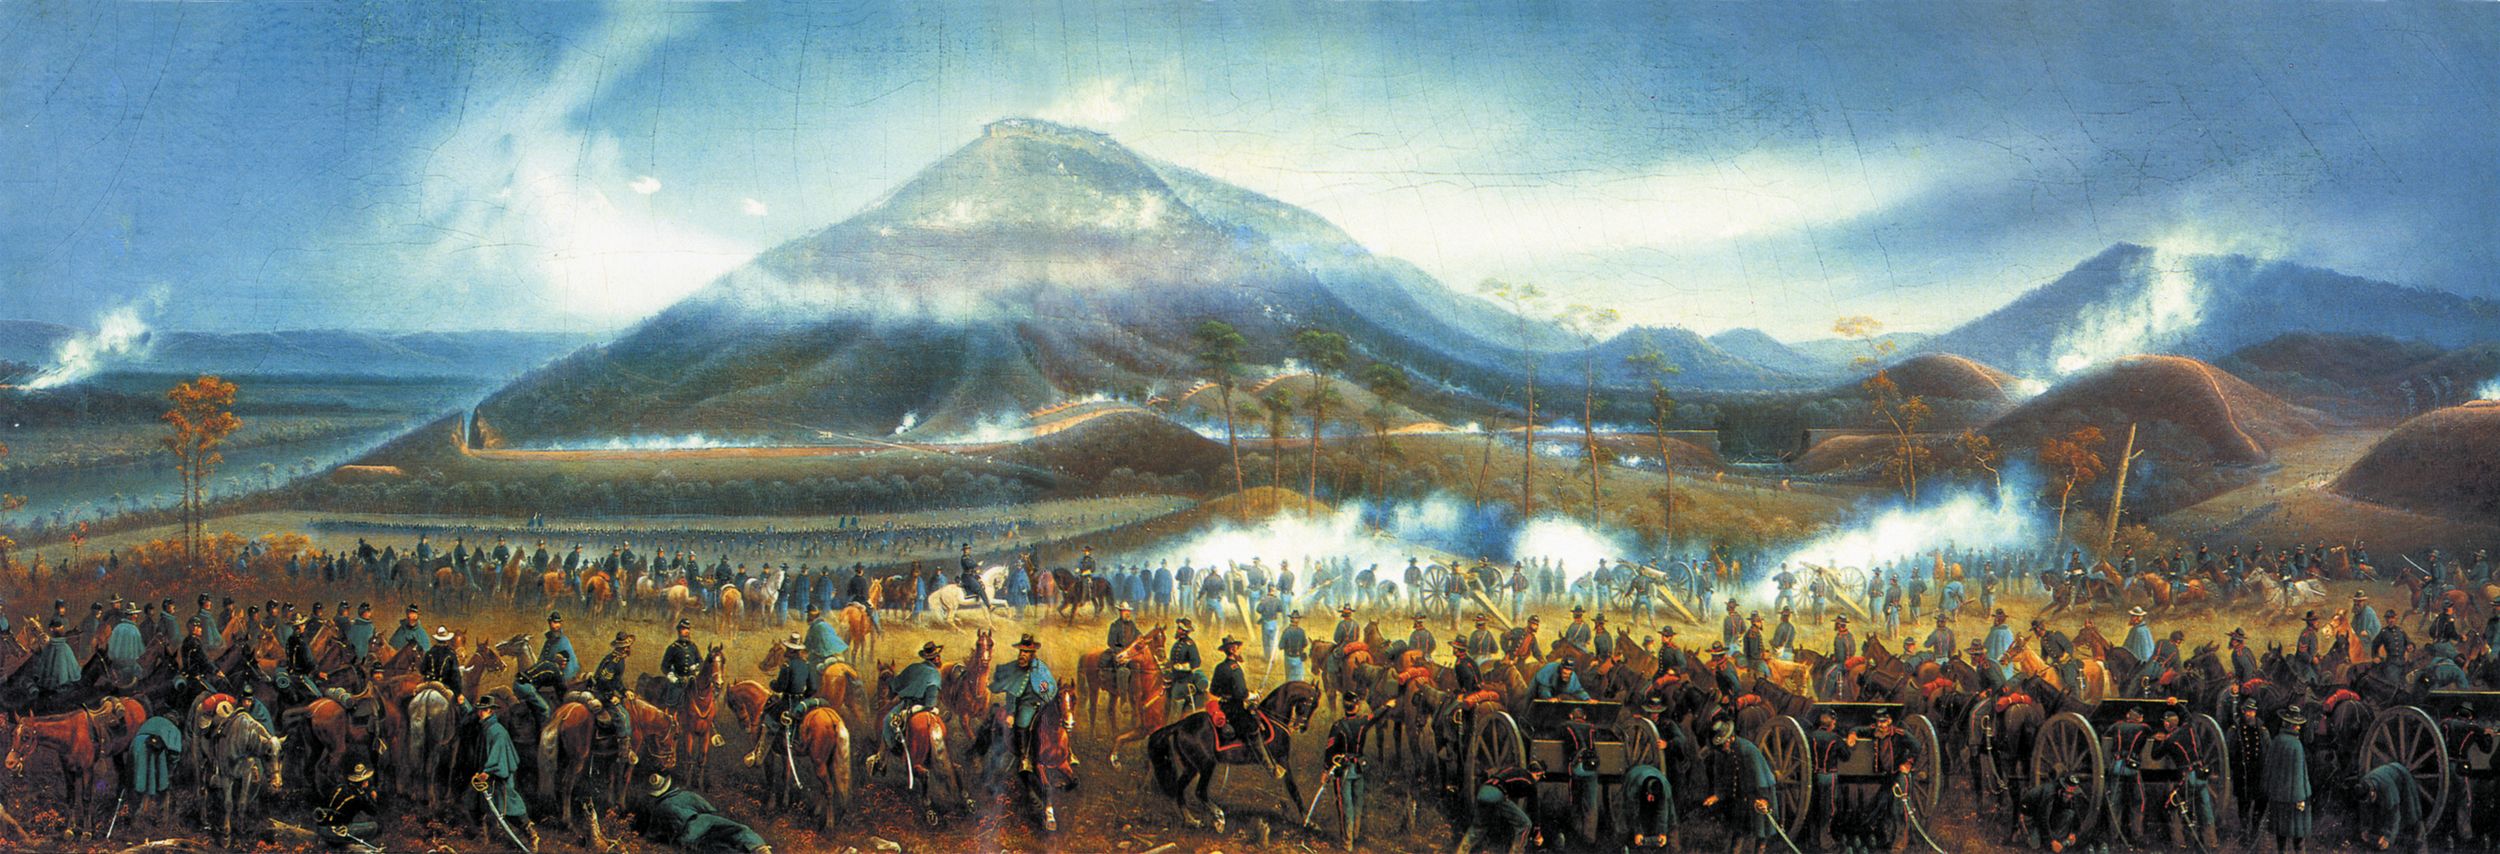 In this highly romanticized 19th century painting, Maj. Gen. Joseph Hooker, riding the white horse in the center, directs massed artillery fire on Rebel positions on Lookout Mountain. 